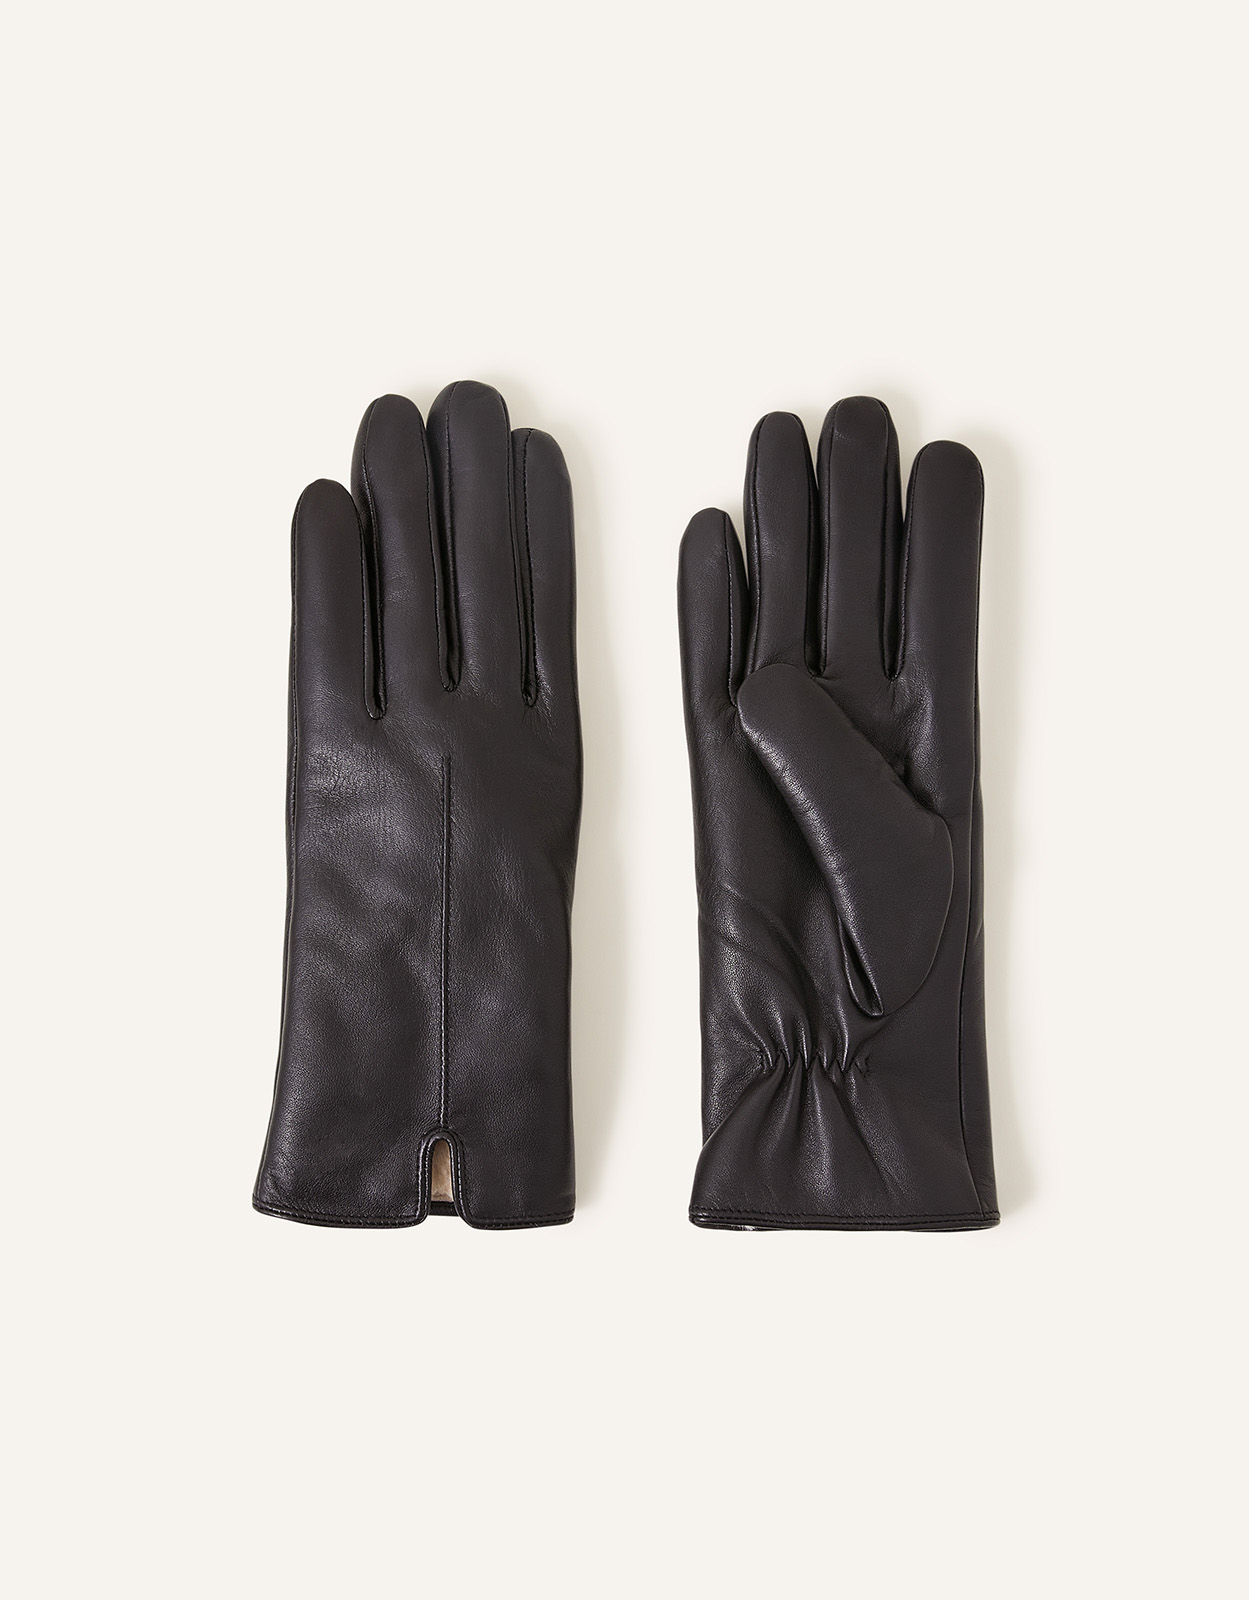 Accessorize Faux Fur-Lined Leather Gloves Black